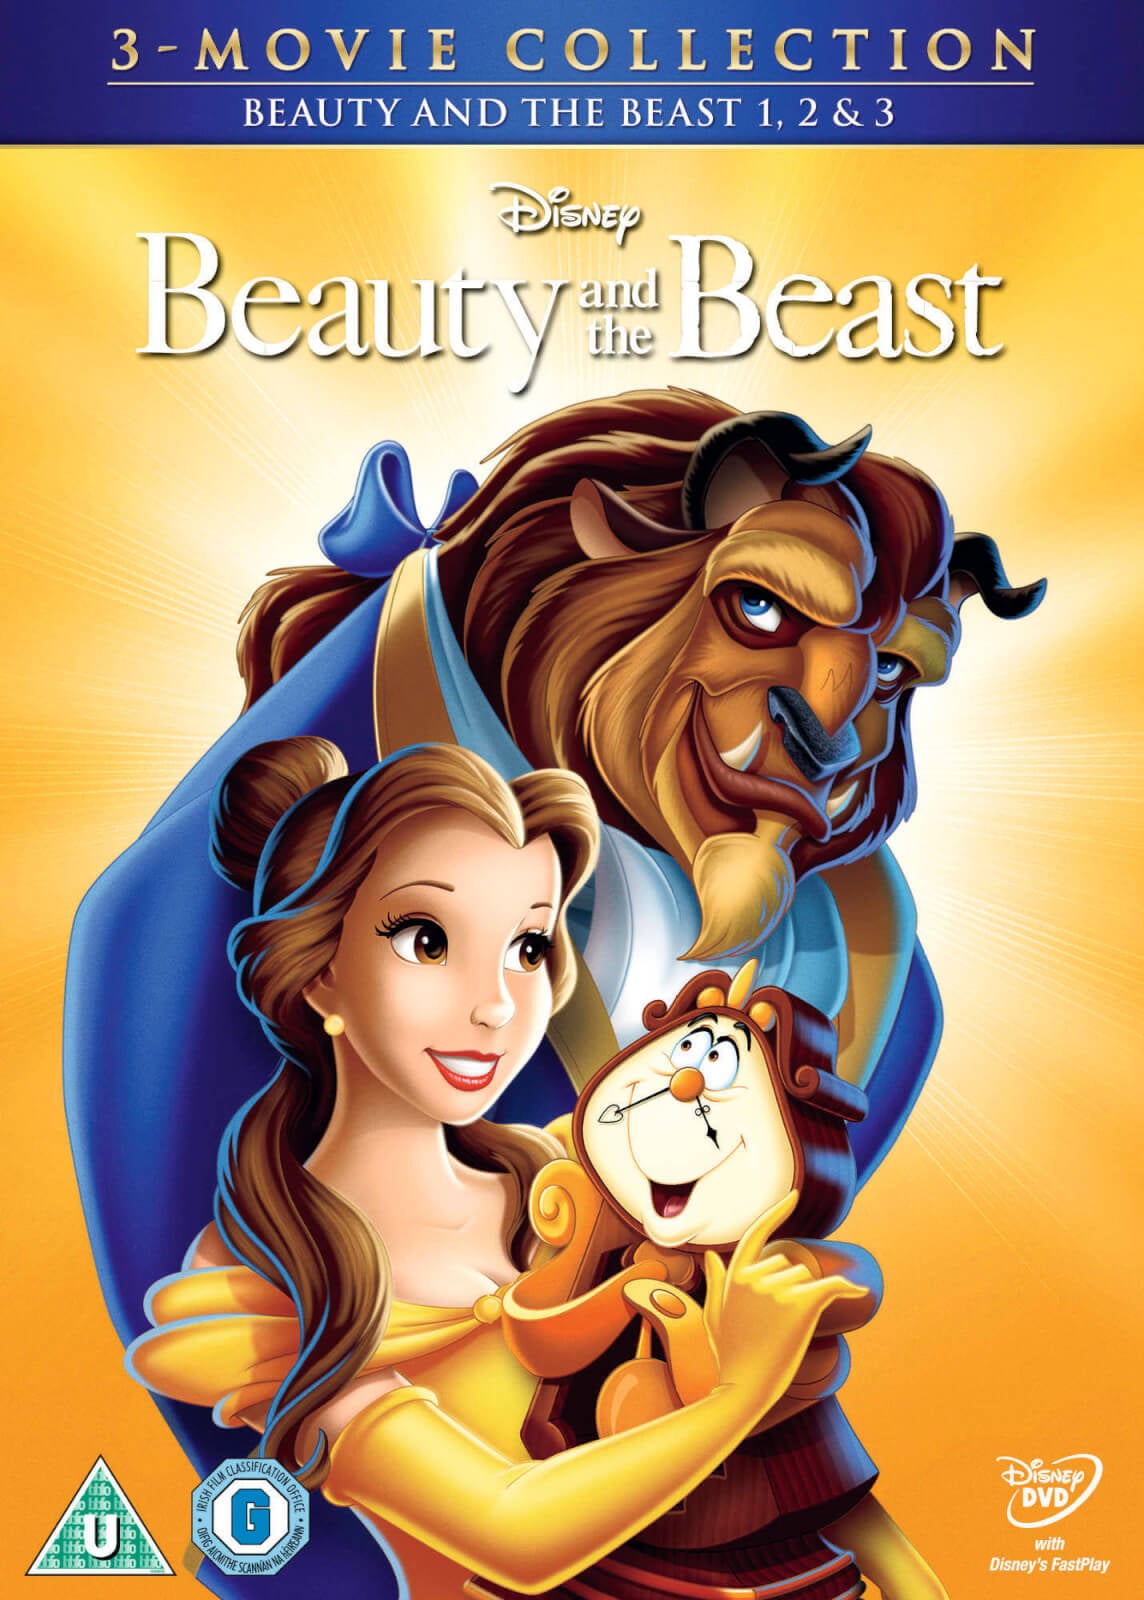 The　World　the　Beauty　and　Zavvi　DVD　Beast　Belle's　Christmas　Magical　Enchanted　UK